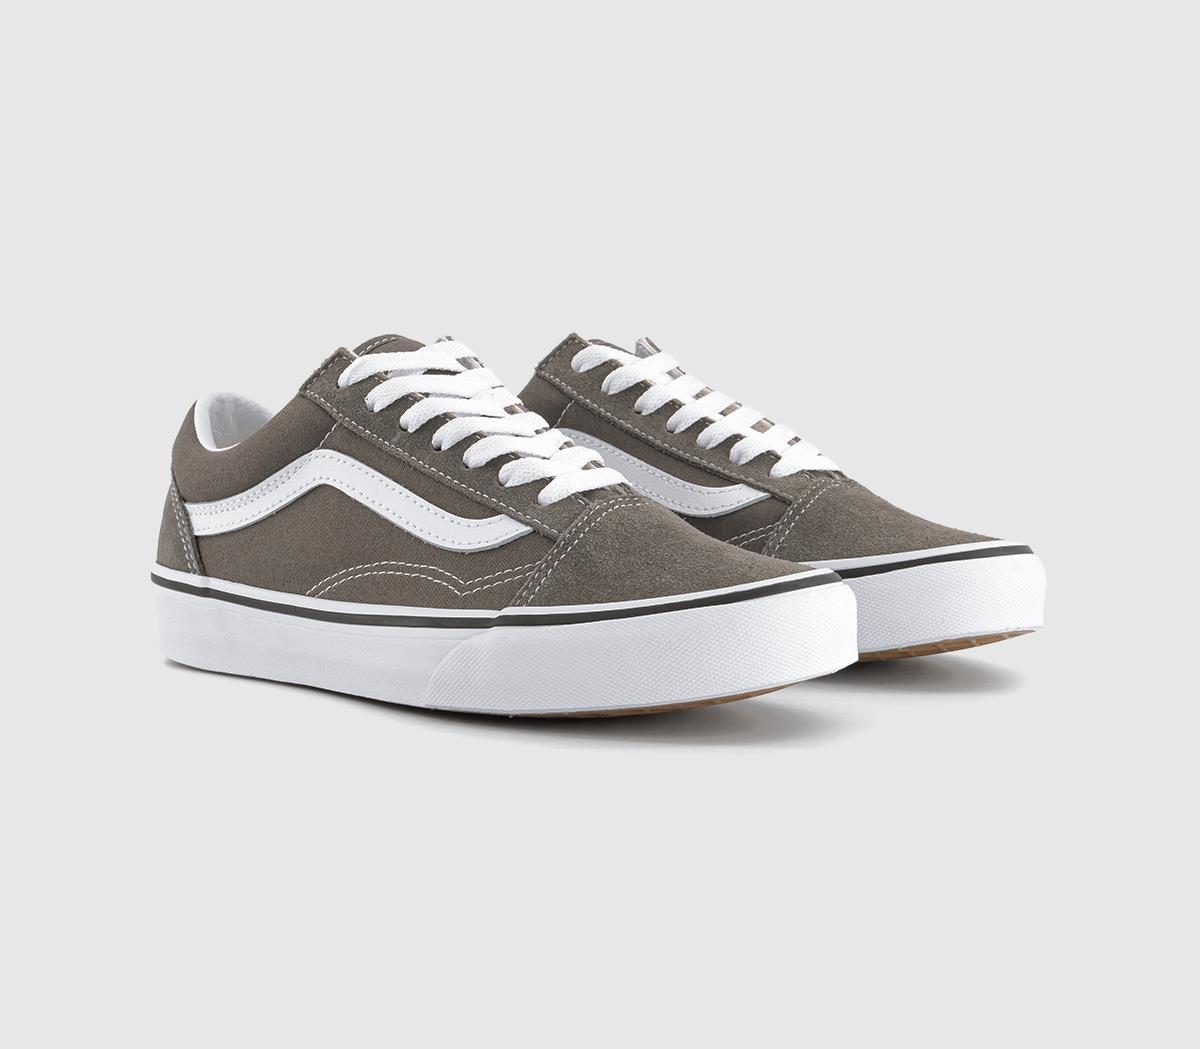 Vans Old Skool Trainers Color Theory Bungee Cord Natural, 5